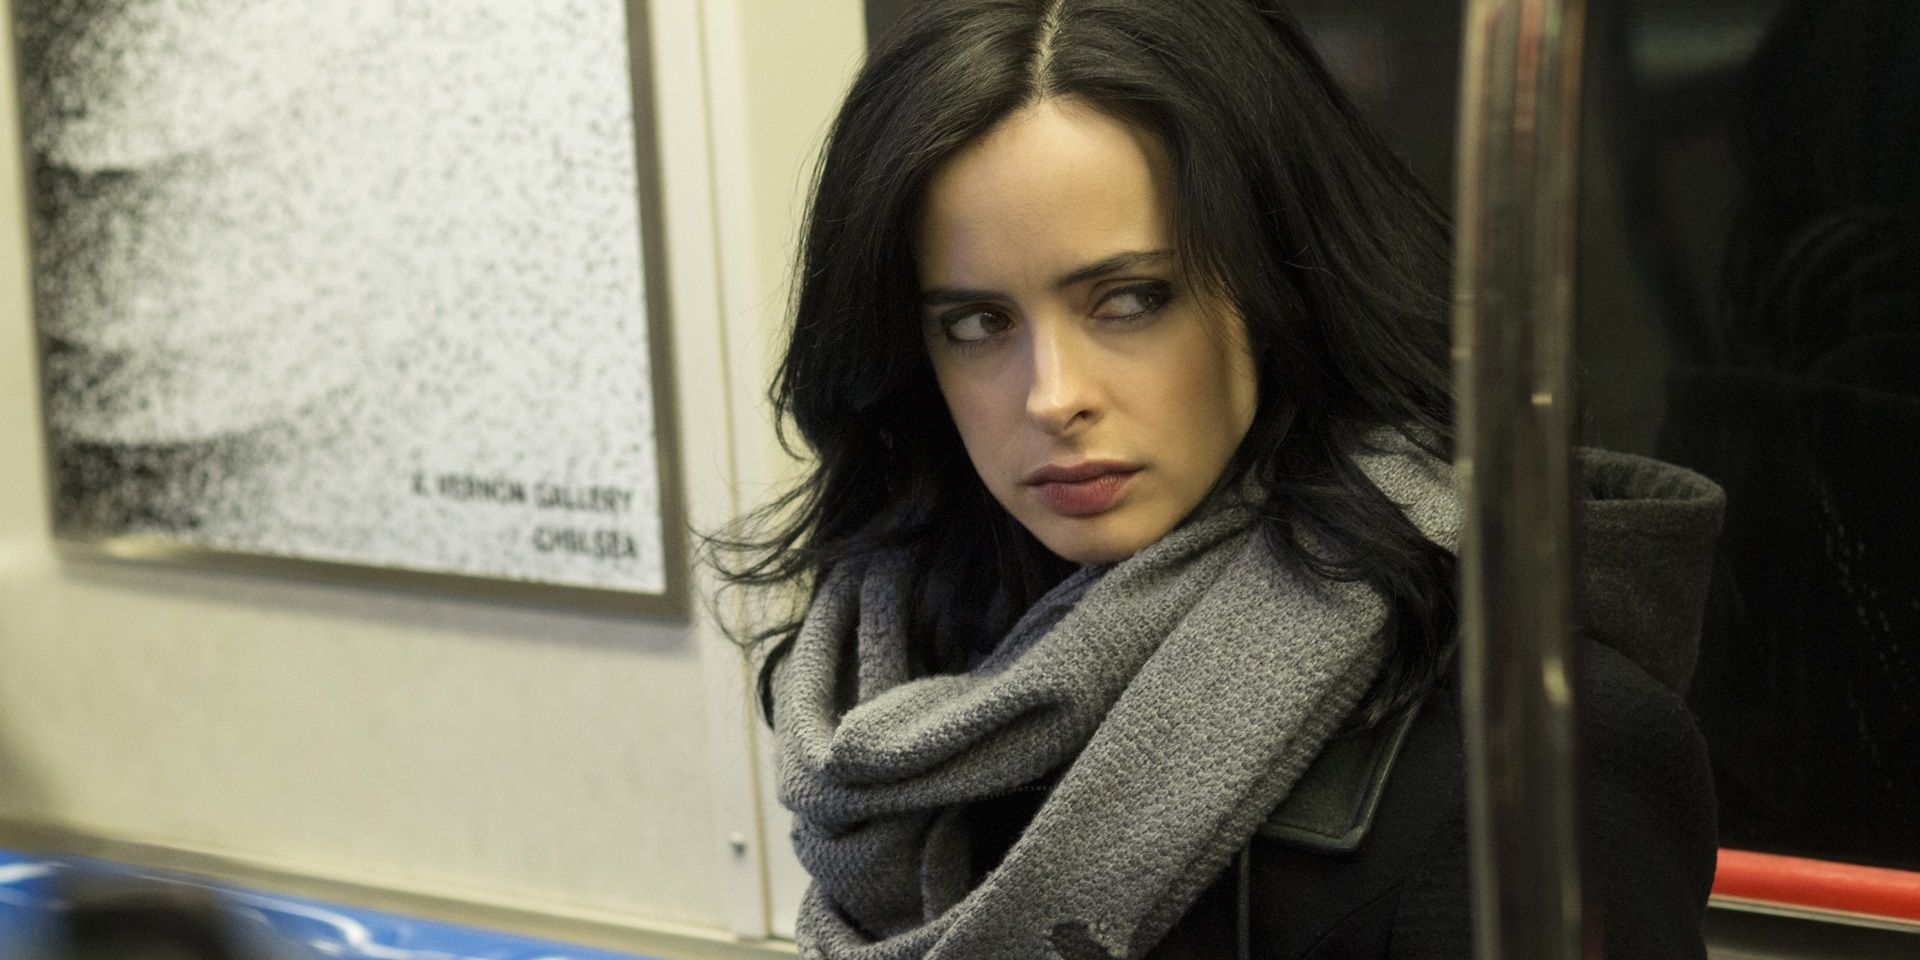 Jessica Jones riding the subway and looking suspiciously at something